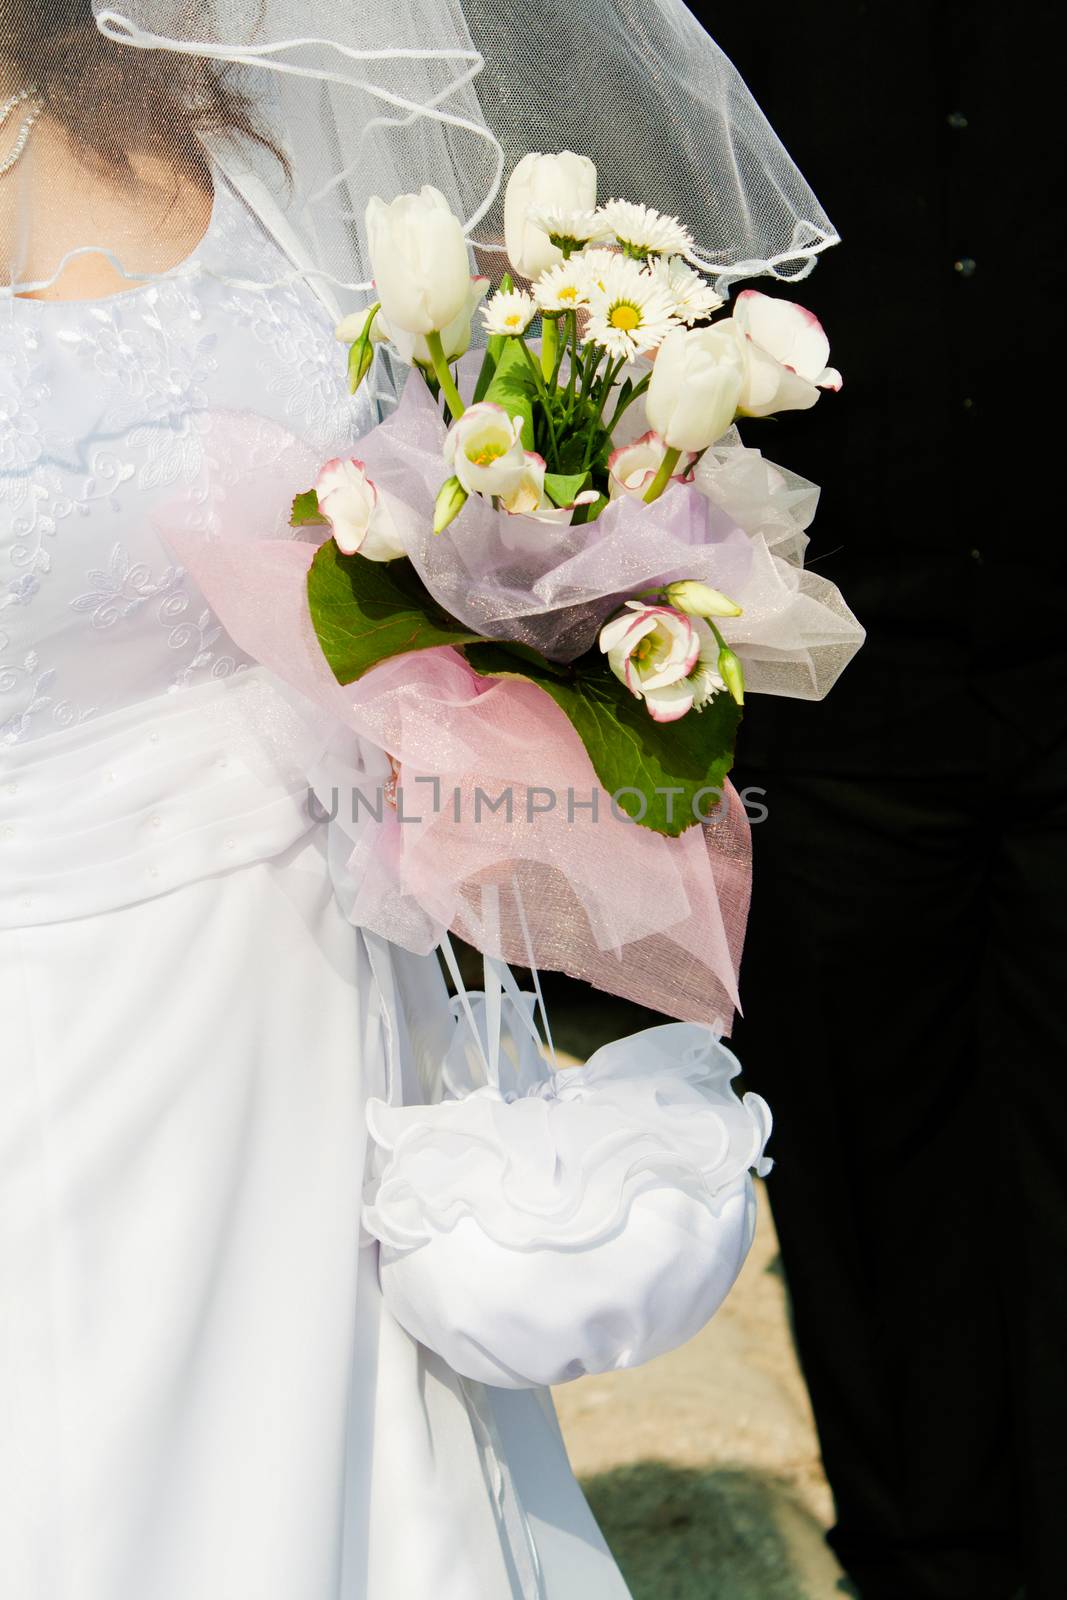 Bride and bouquet. Wedding Bouquet by maggee